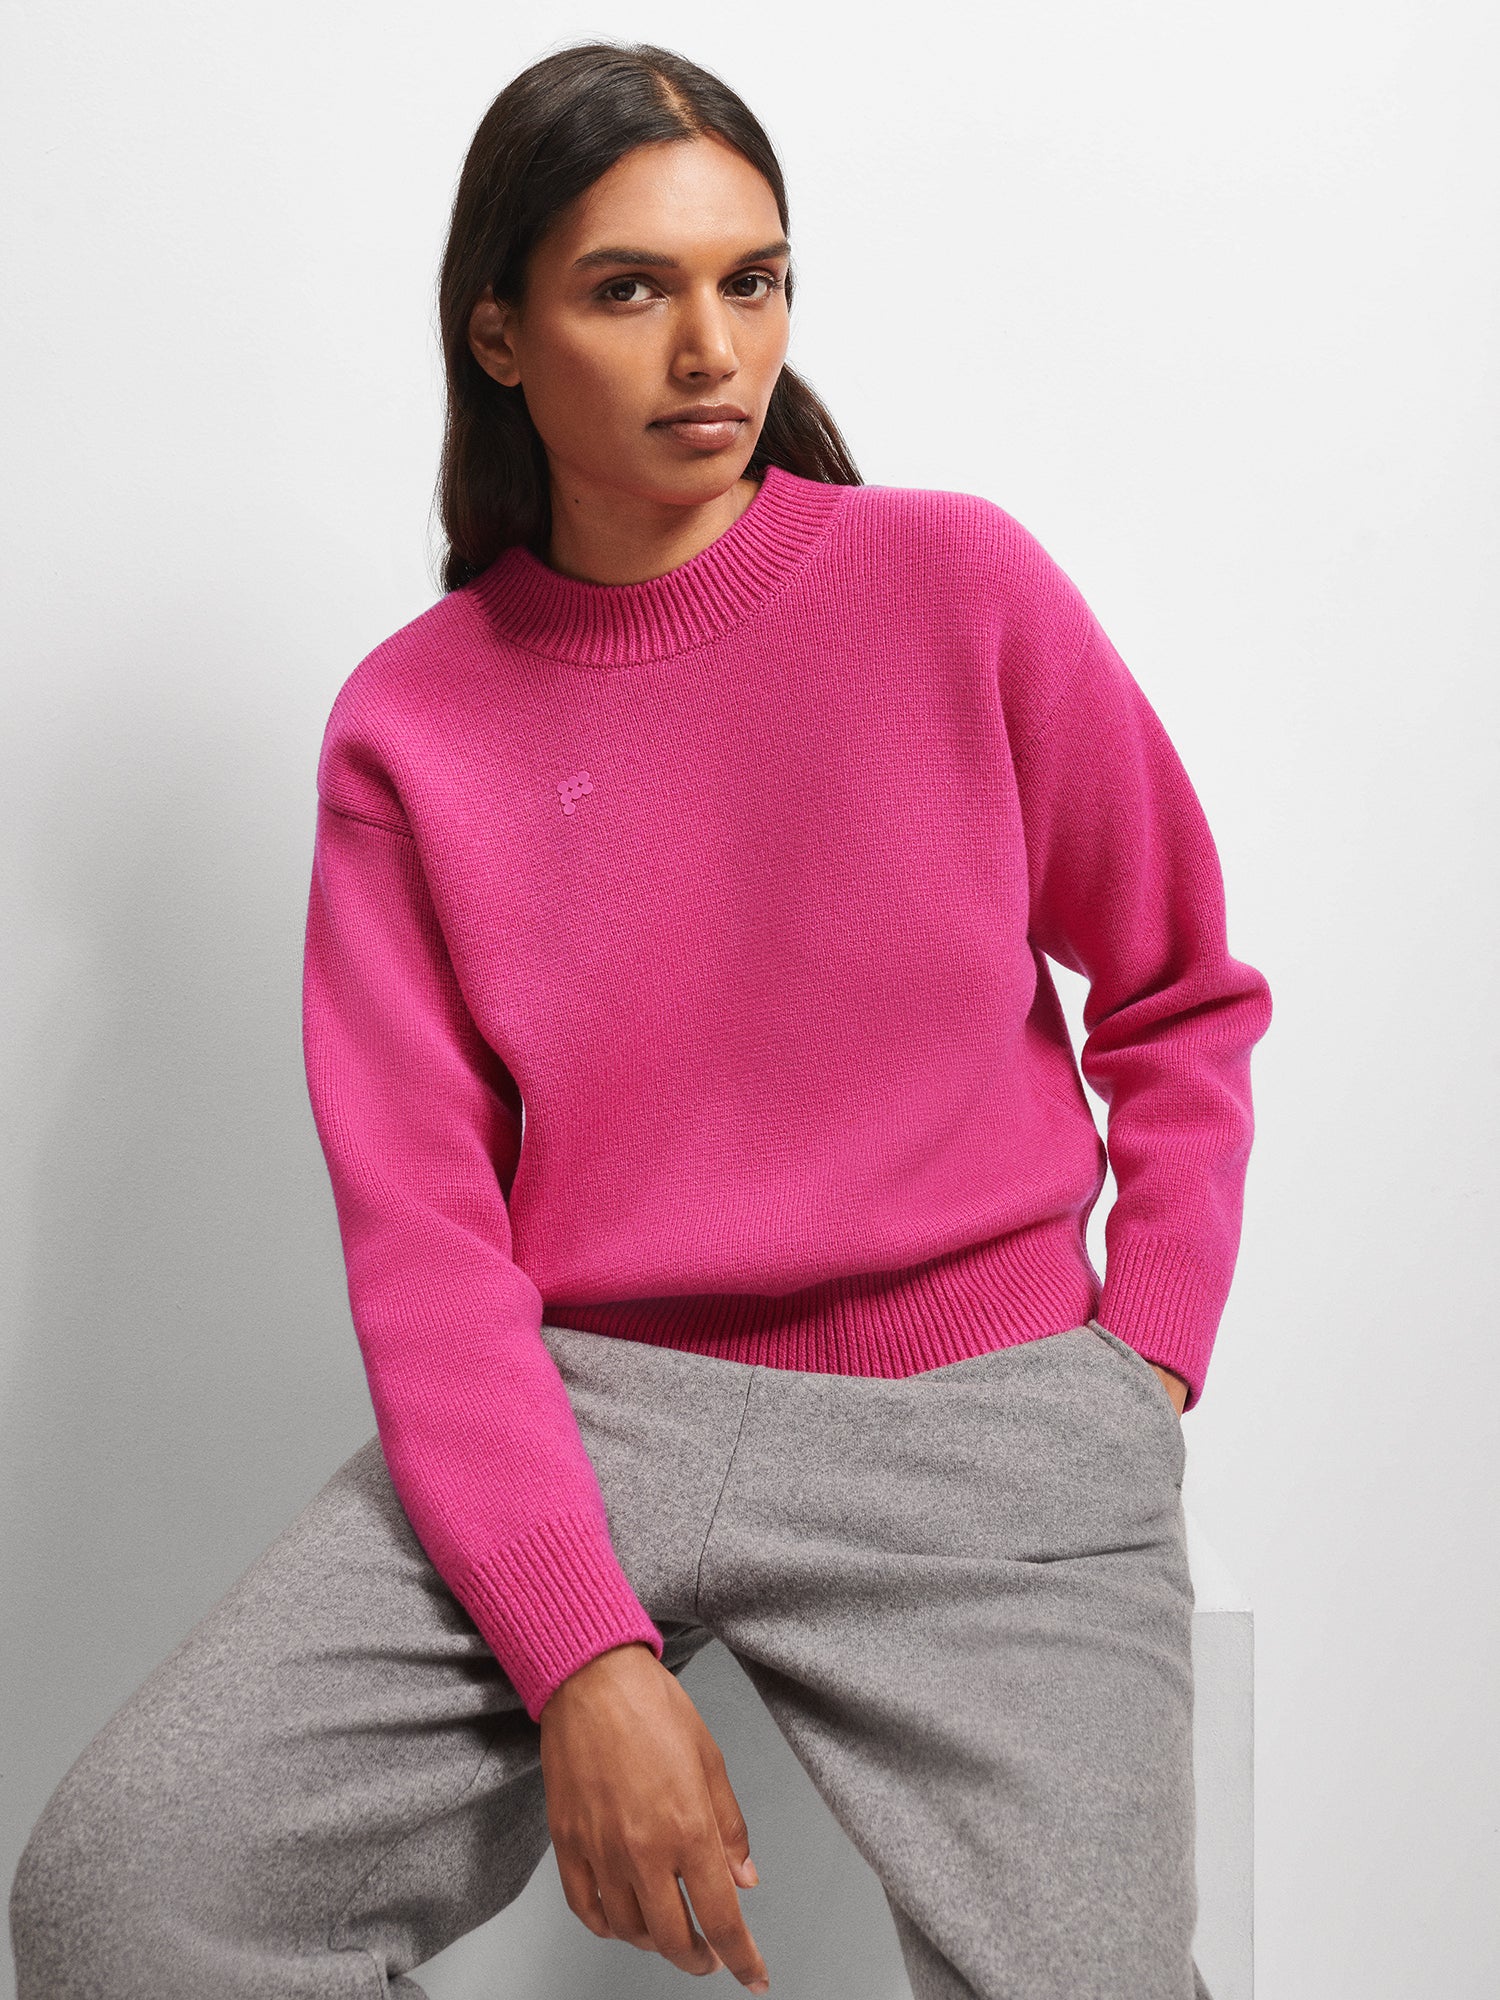 Womens_Recycled_Cashmere_Knit_Crew_Neck_Sweater_Tourmaline_Pink-female-4